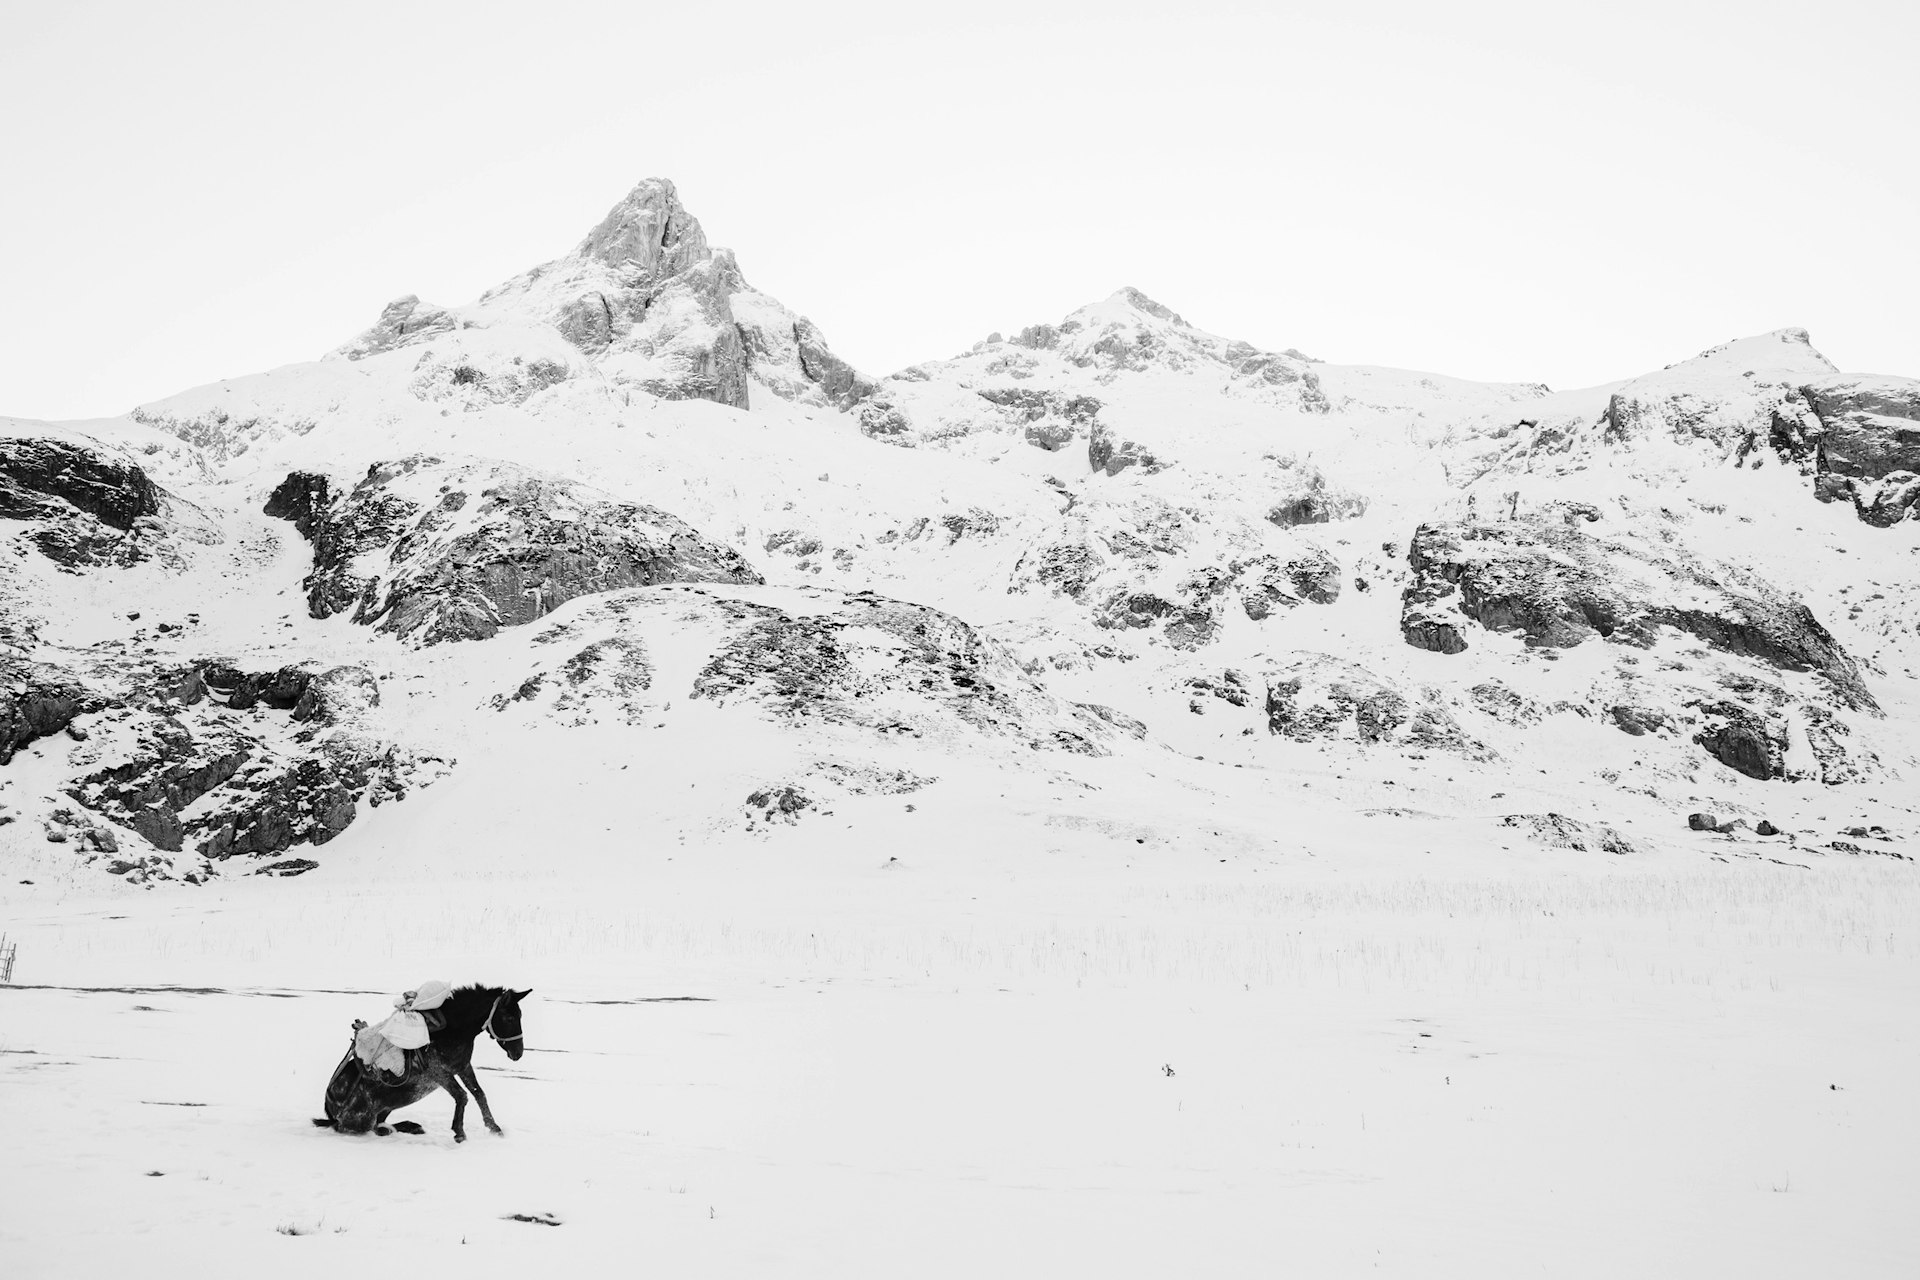 A donkey is getting up after rolling in the snow in the mountains in Albania. 